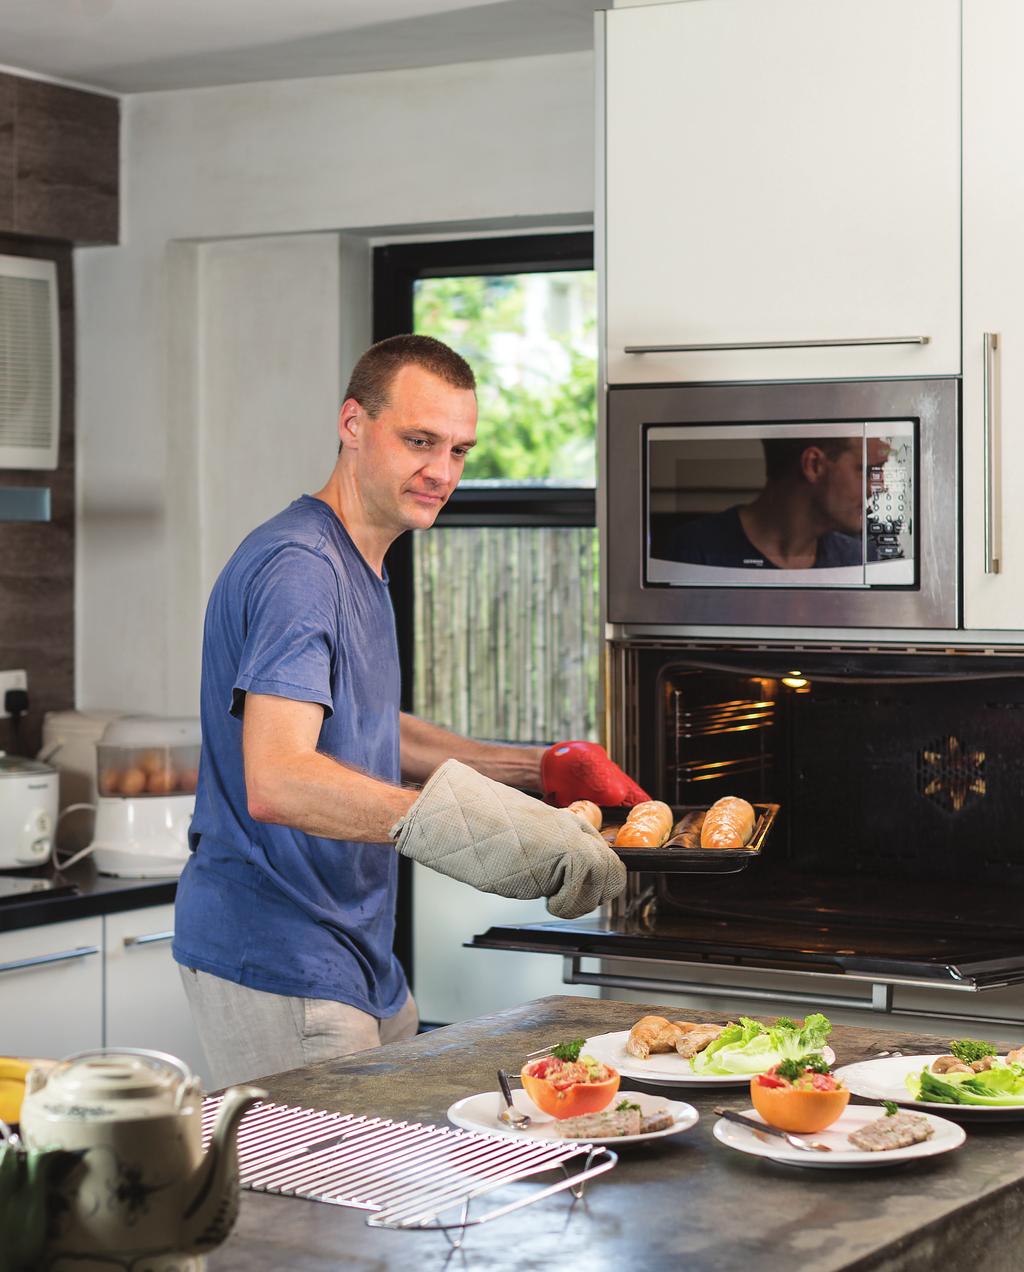 Work and life Cooking Gilles Alexandre Salansy takes freshly baked baguettes out of the oven to compliment his French